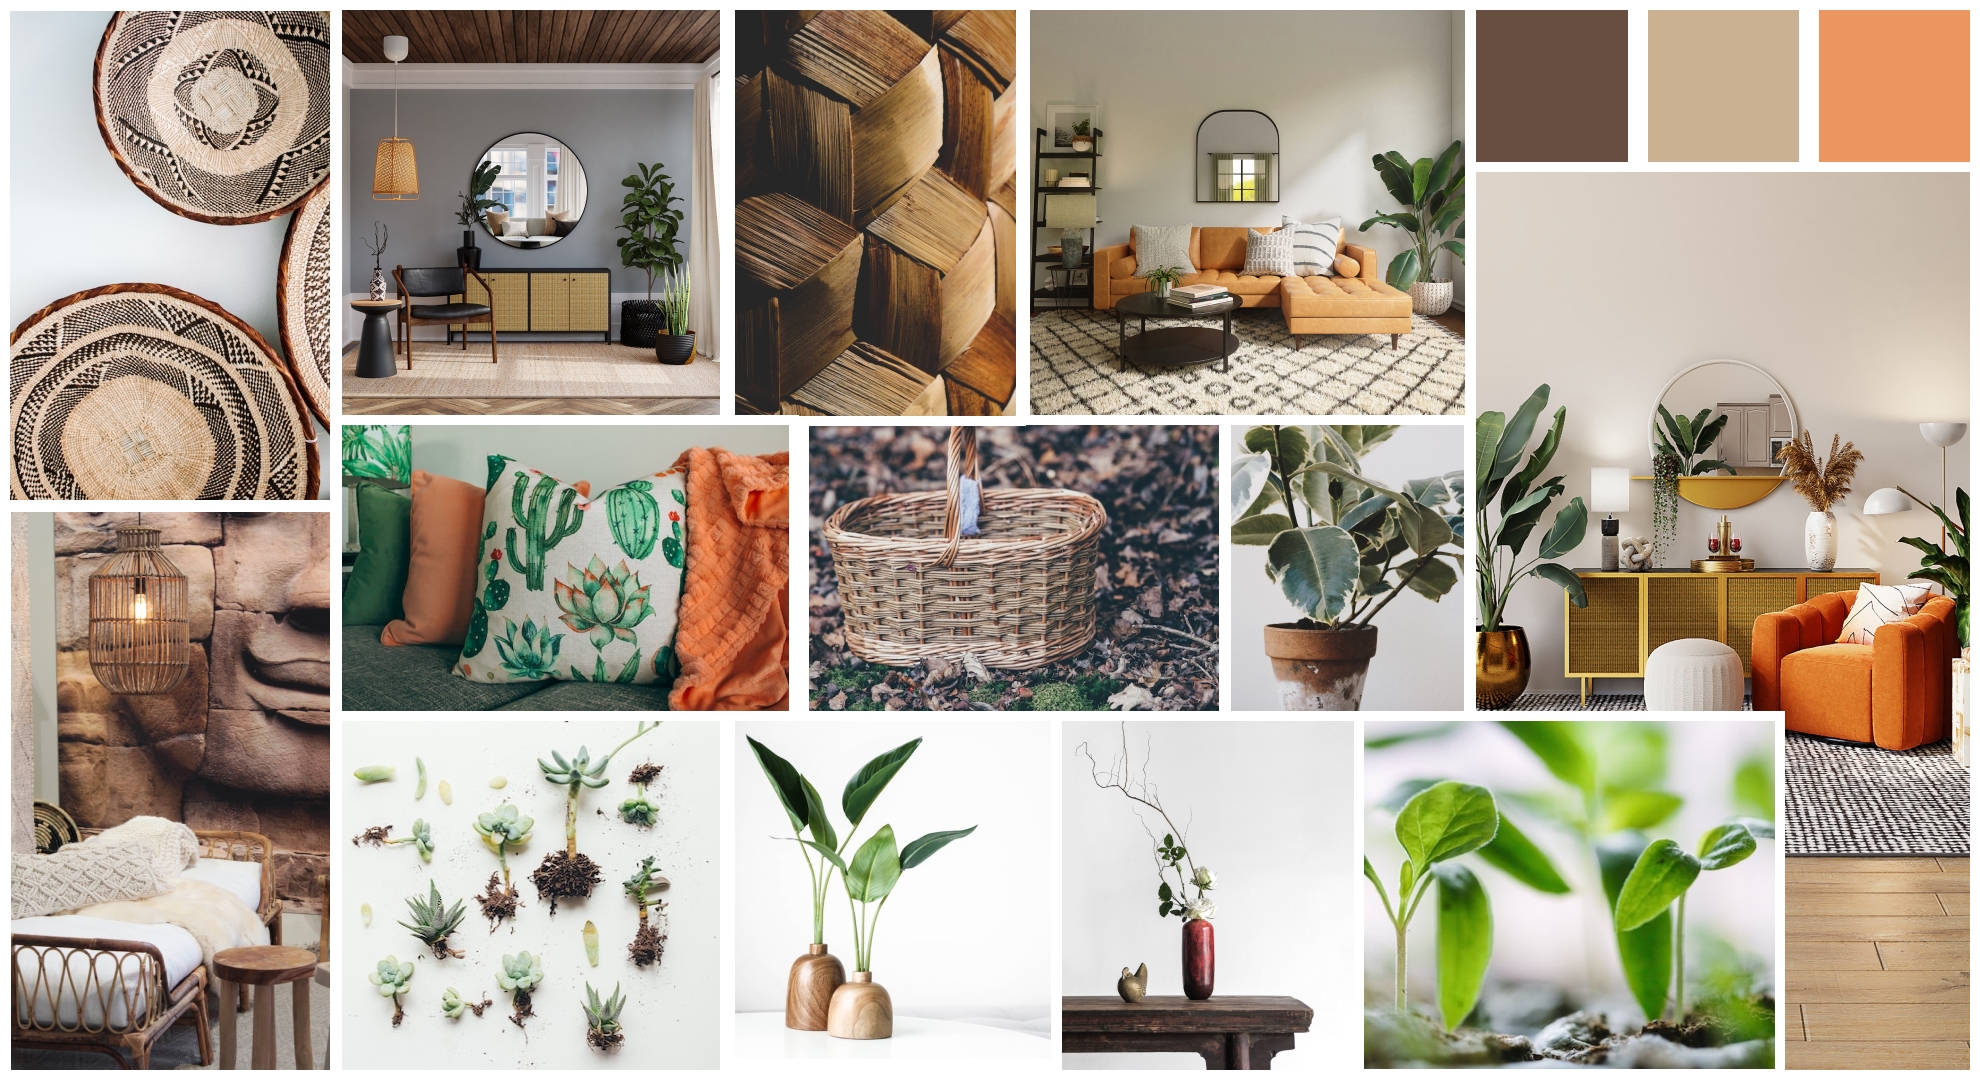 How to Create an Appealing Interior Design Mood Board for Your Next Renovation Project